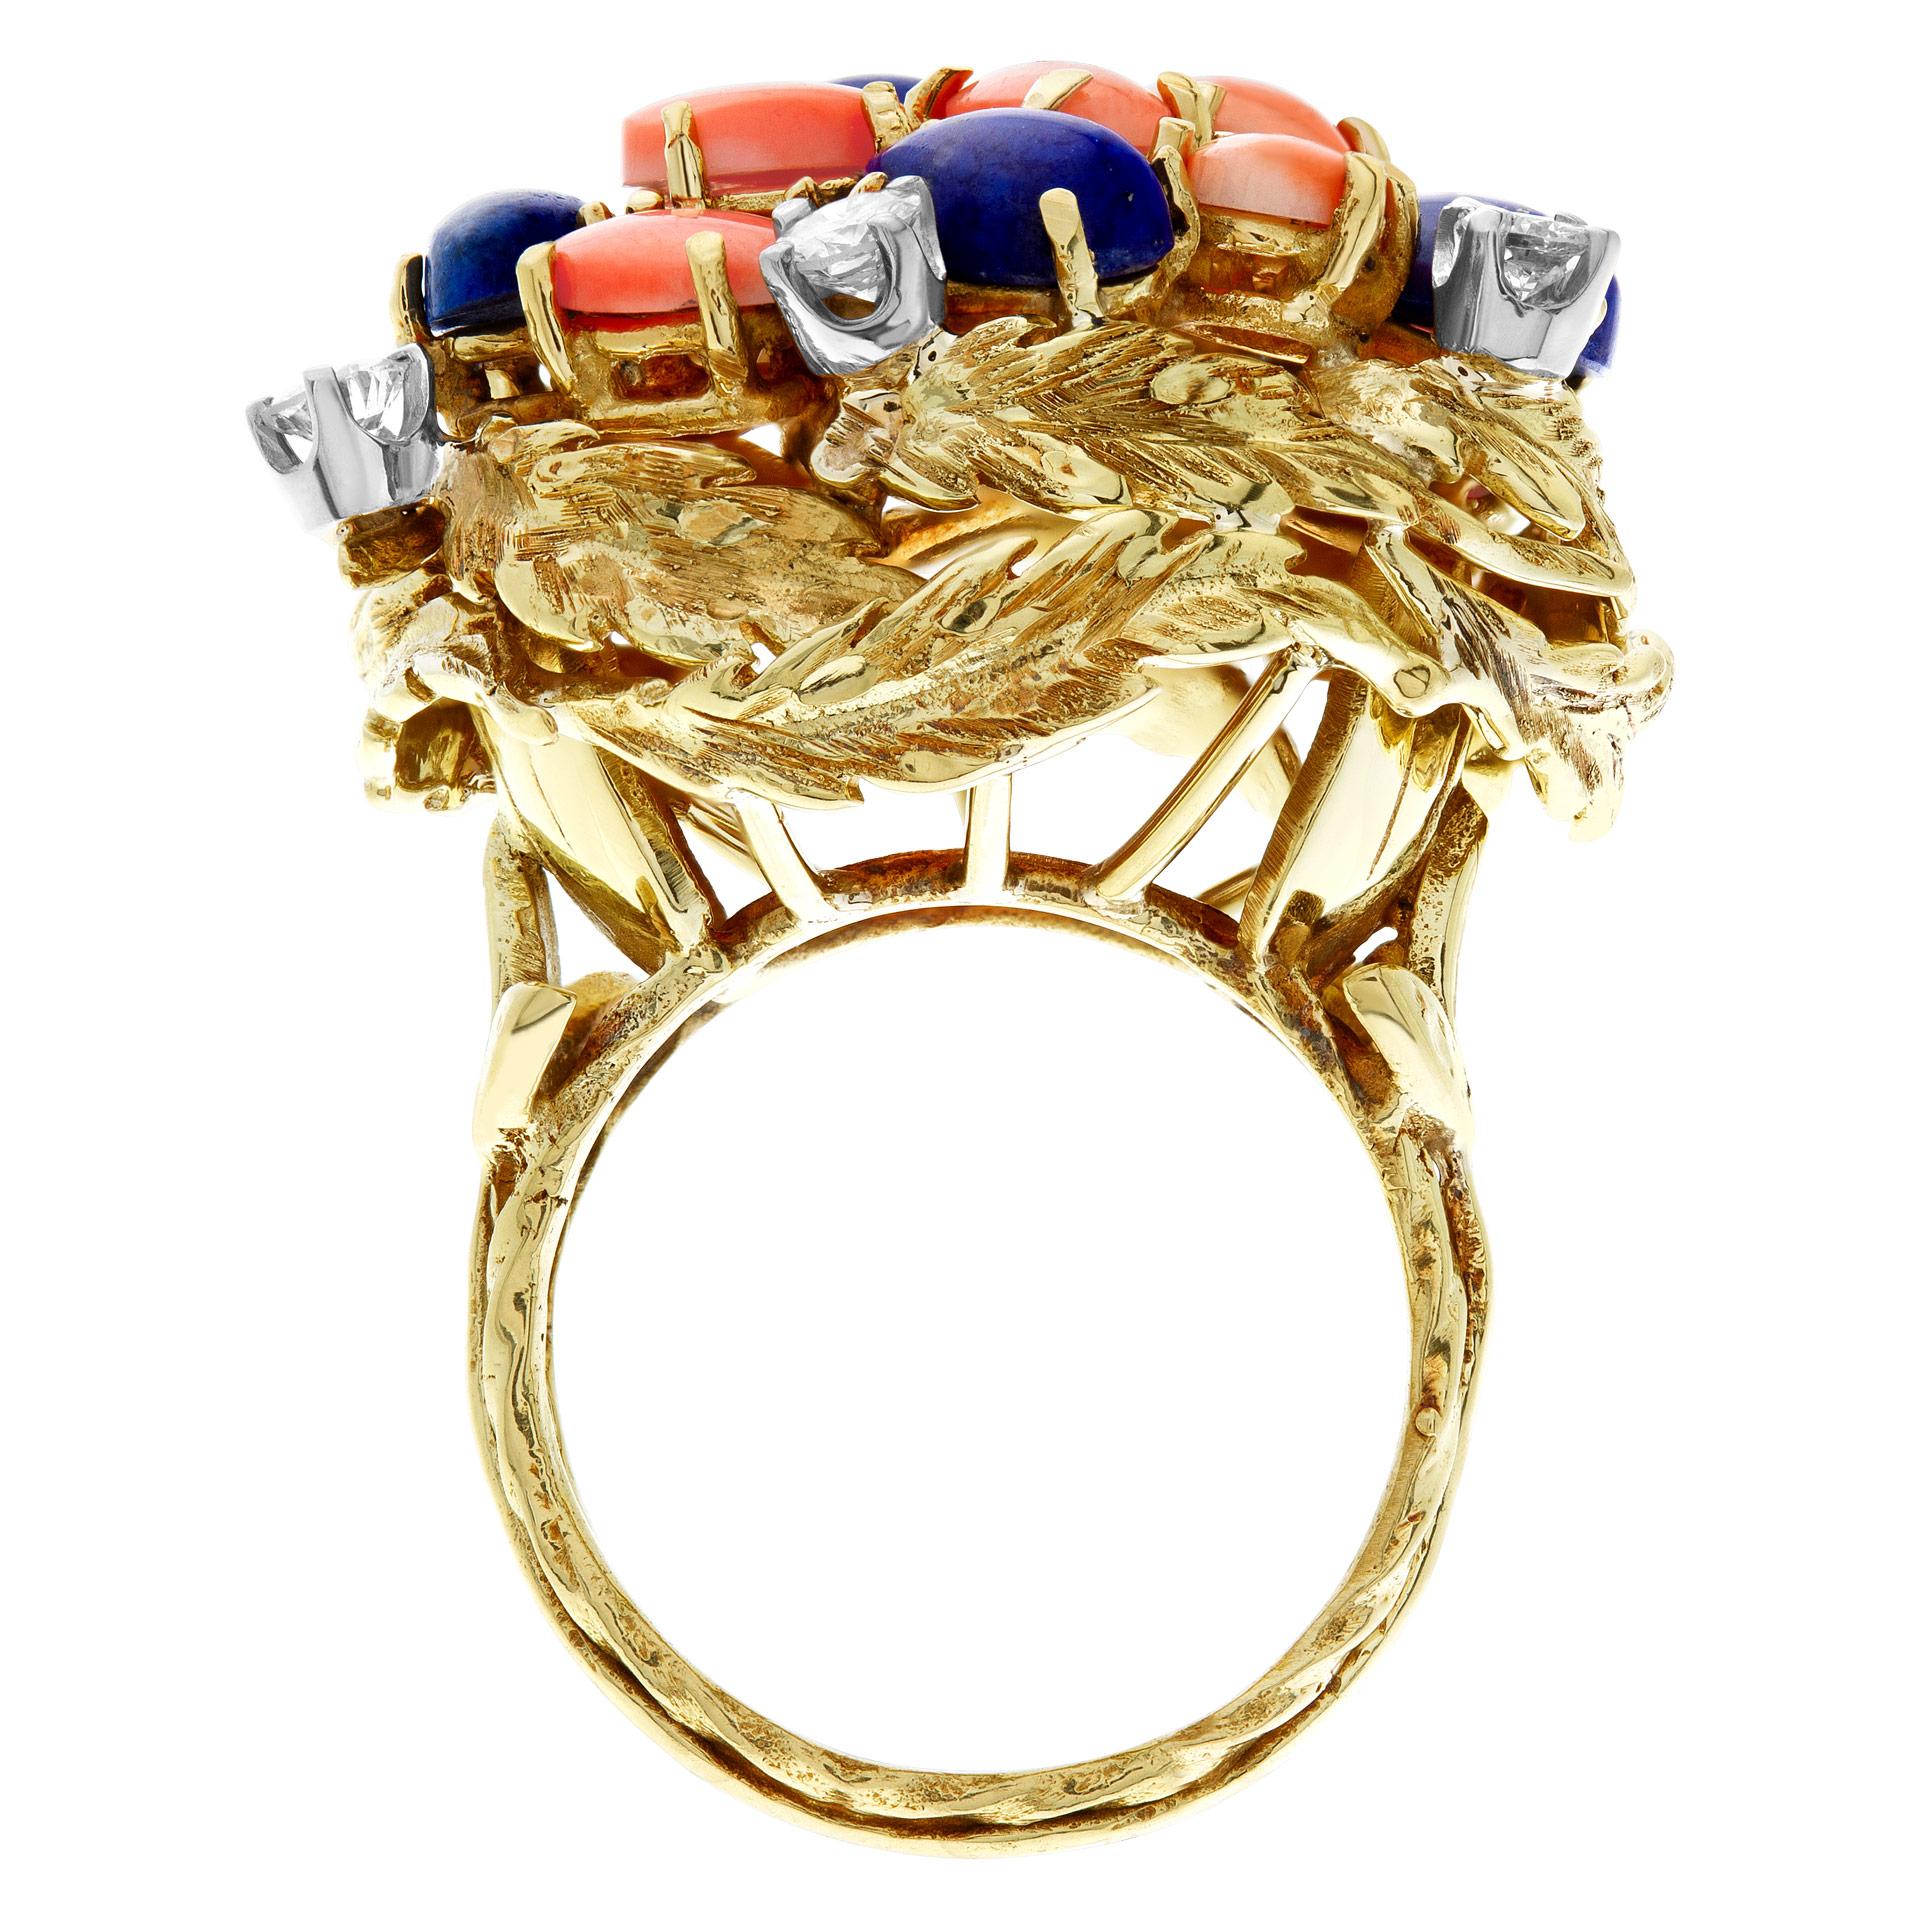 Lapiz Lazuli & Coral Garden Ring in 18k Yellow Gold with Diamond Accents 1